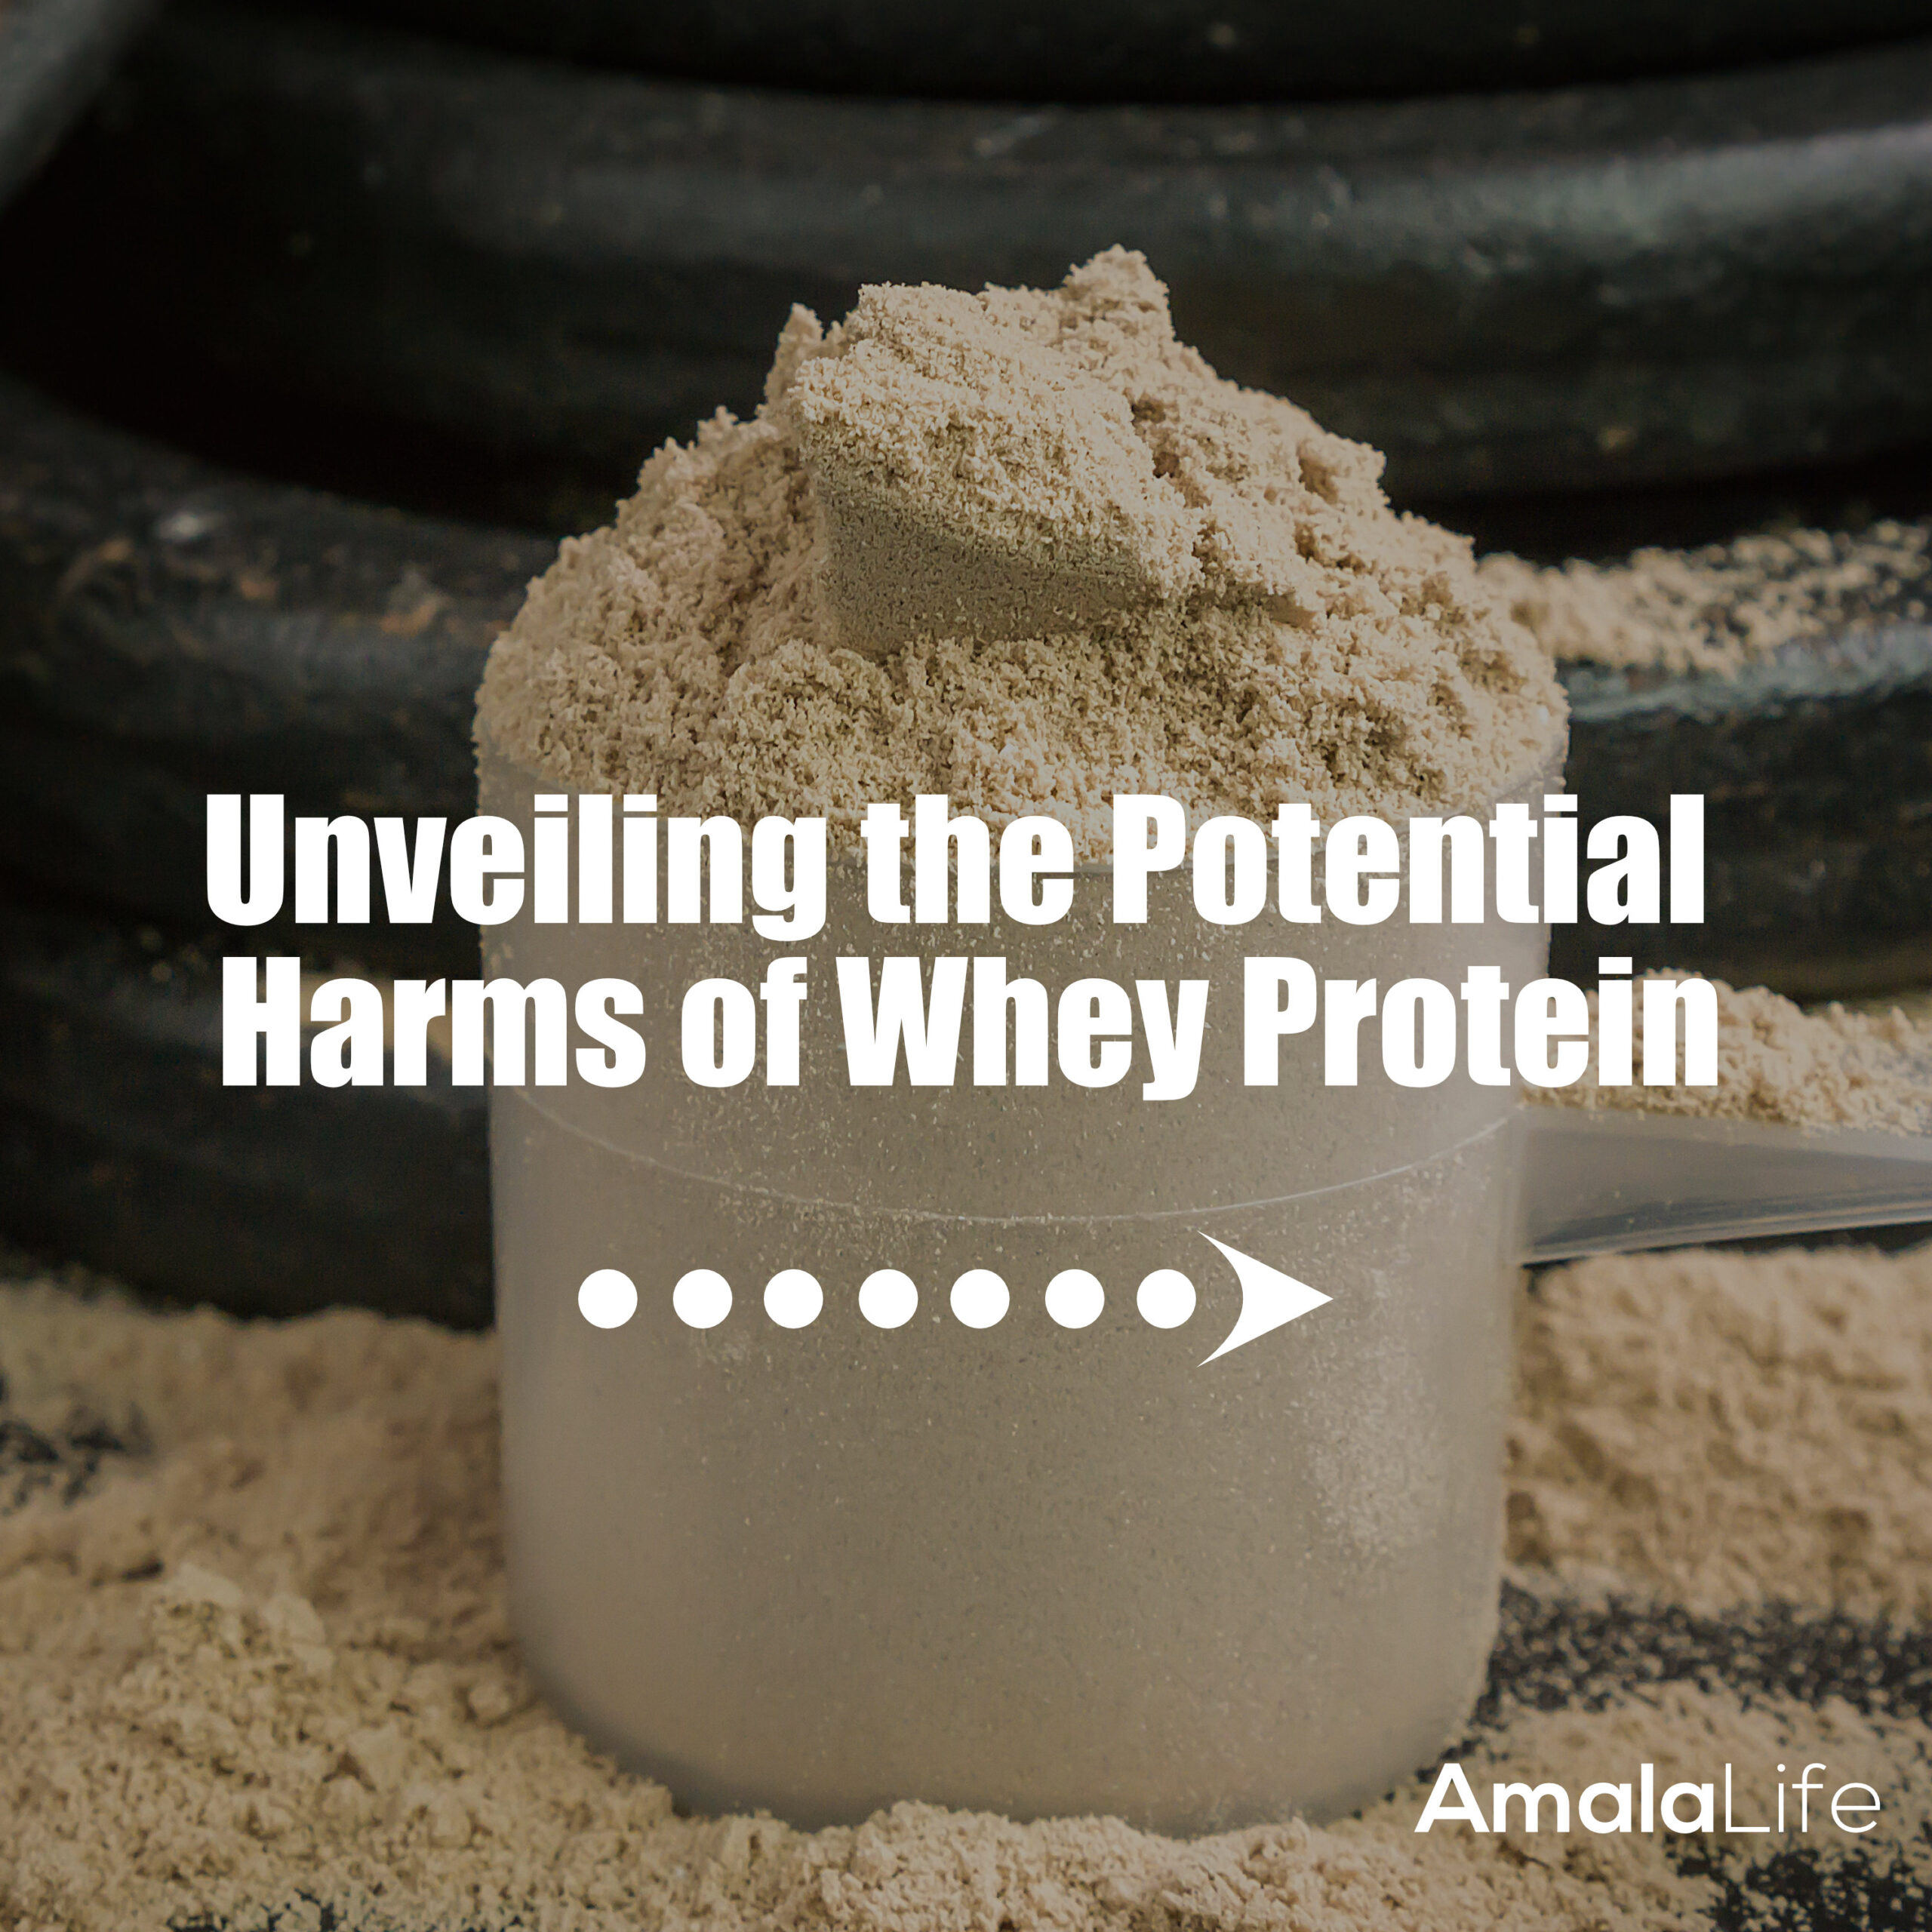 Unveiling the Potential Harms of Whey Protein